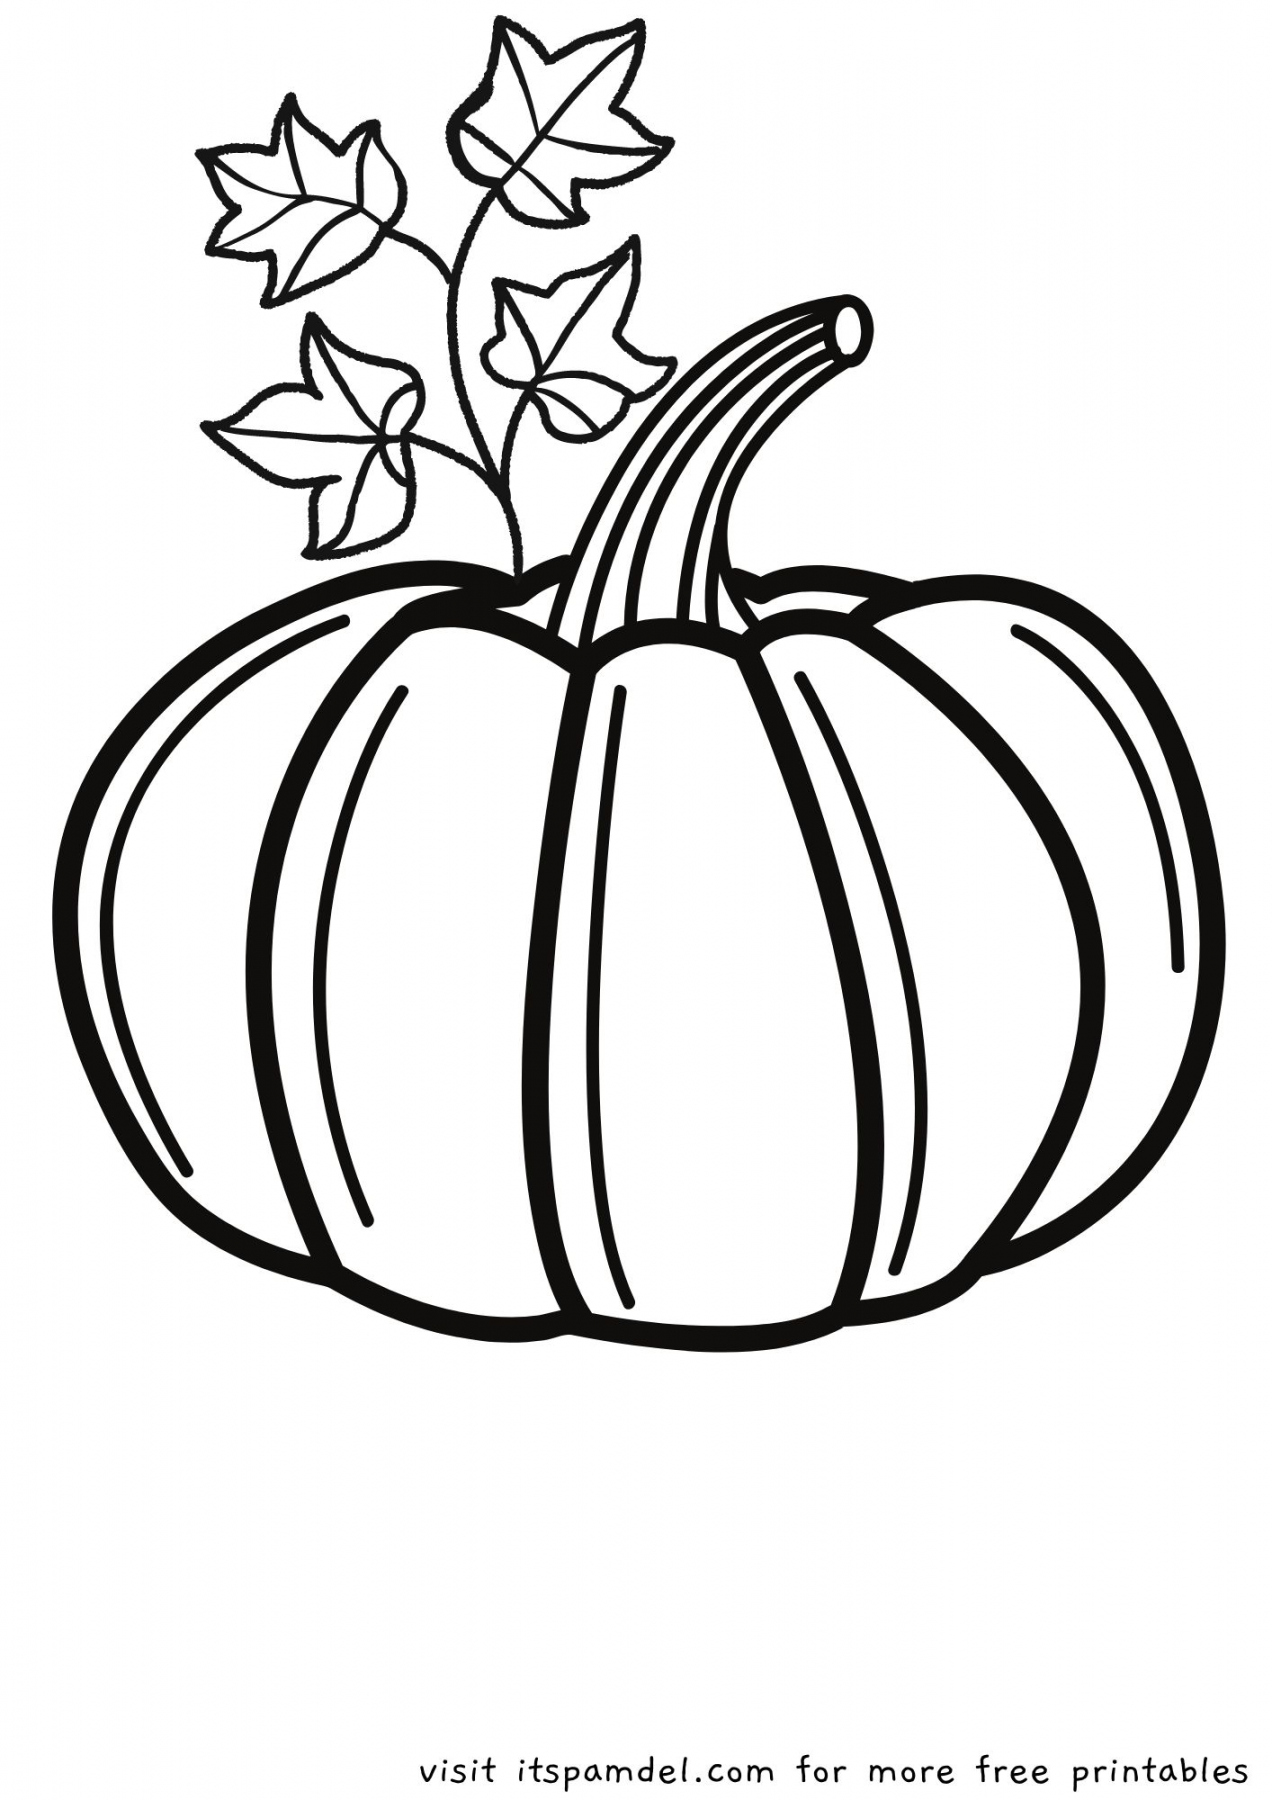 Fall Coloring Pages Free Printable - Printable - Free Printable: Fall Coloring Pages for Kids  It